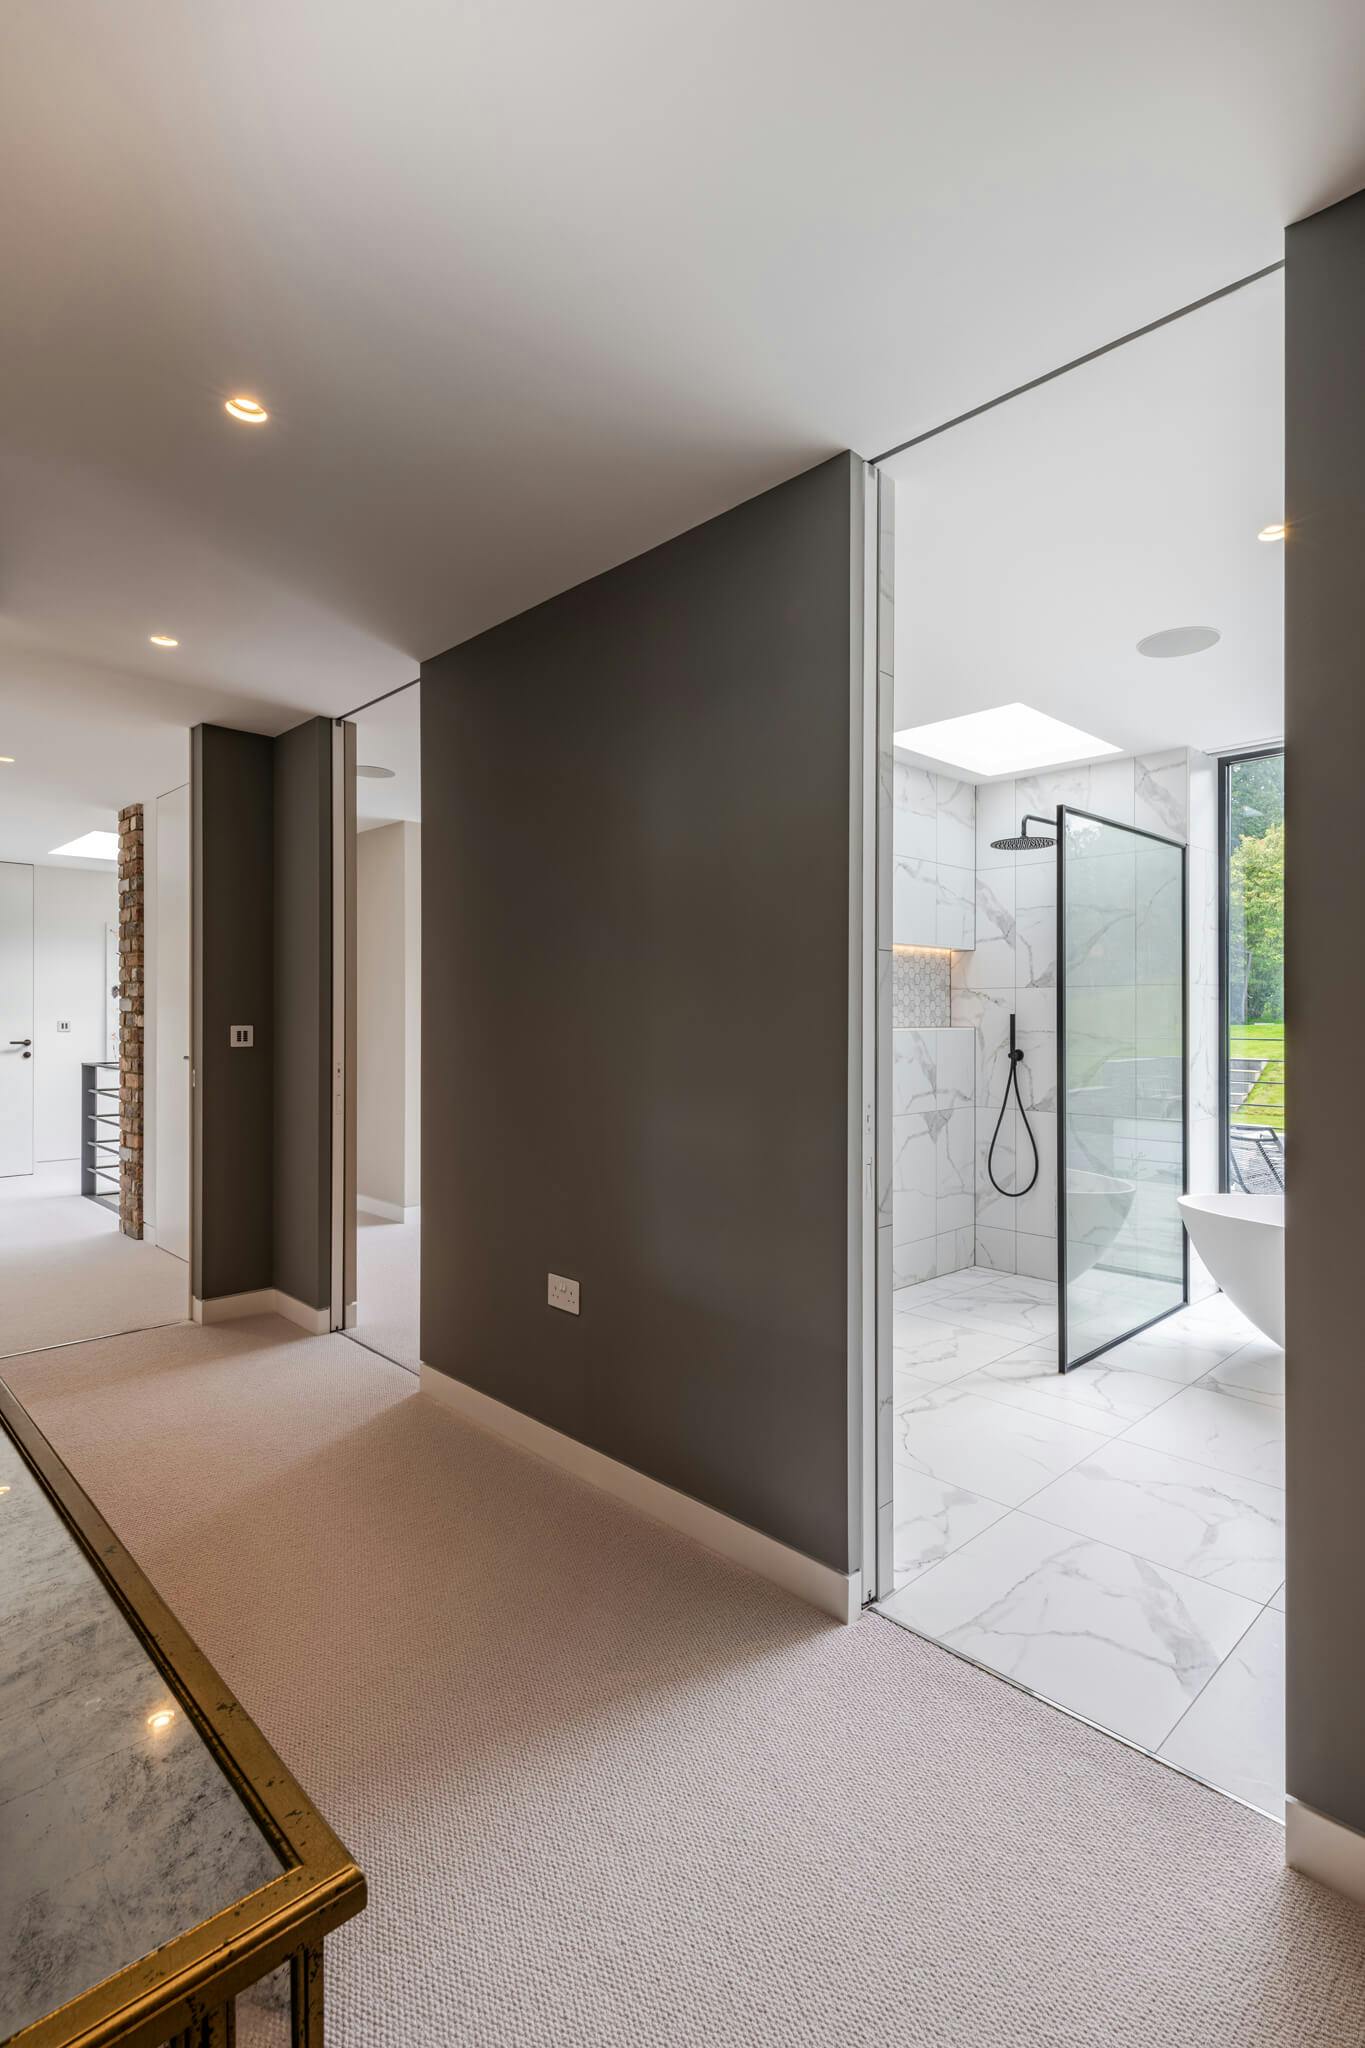 A carpeted hallway with dark grey walls and an opening leading to a white and black tiled bathroom.